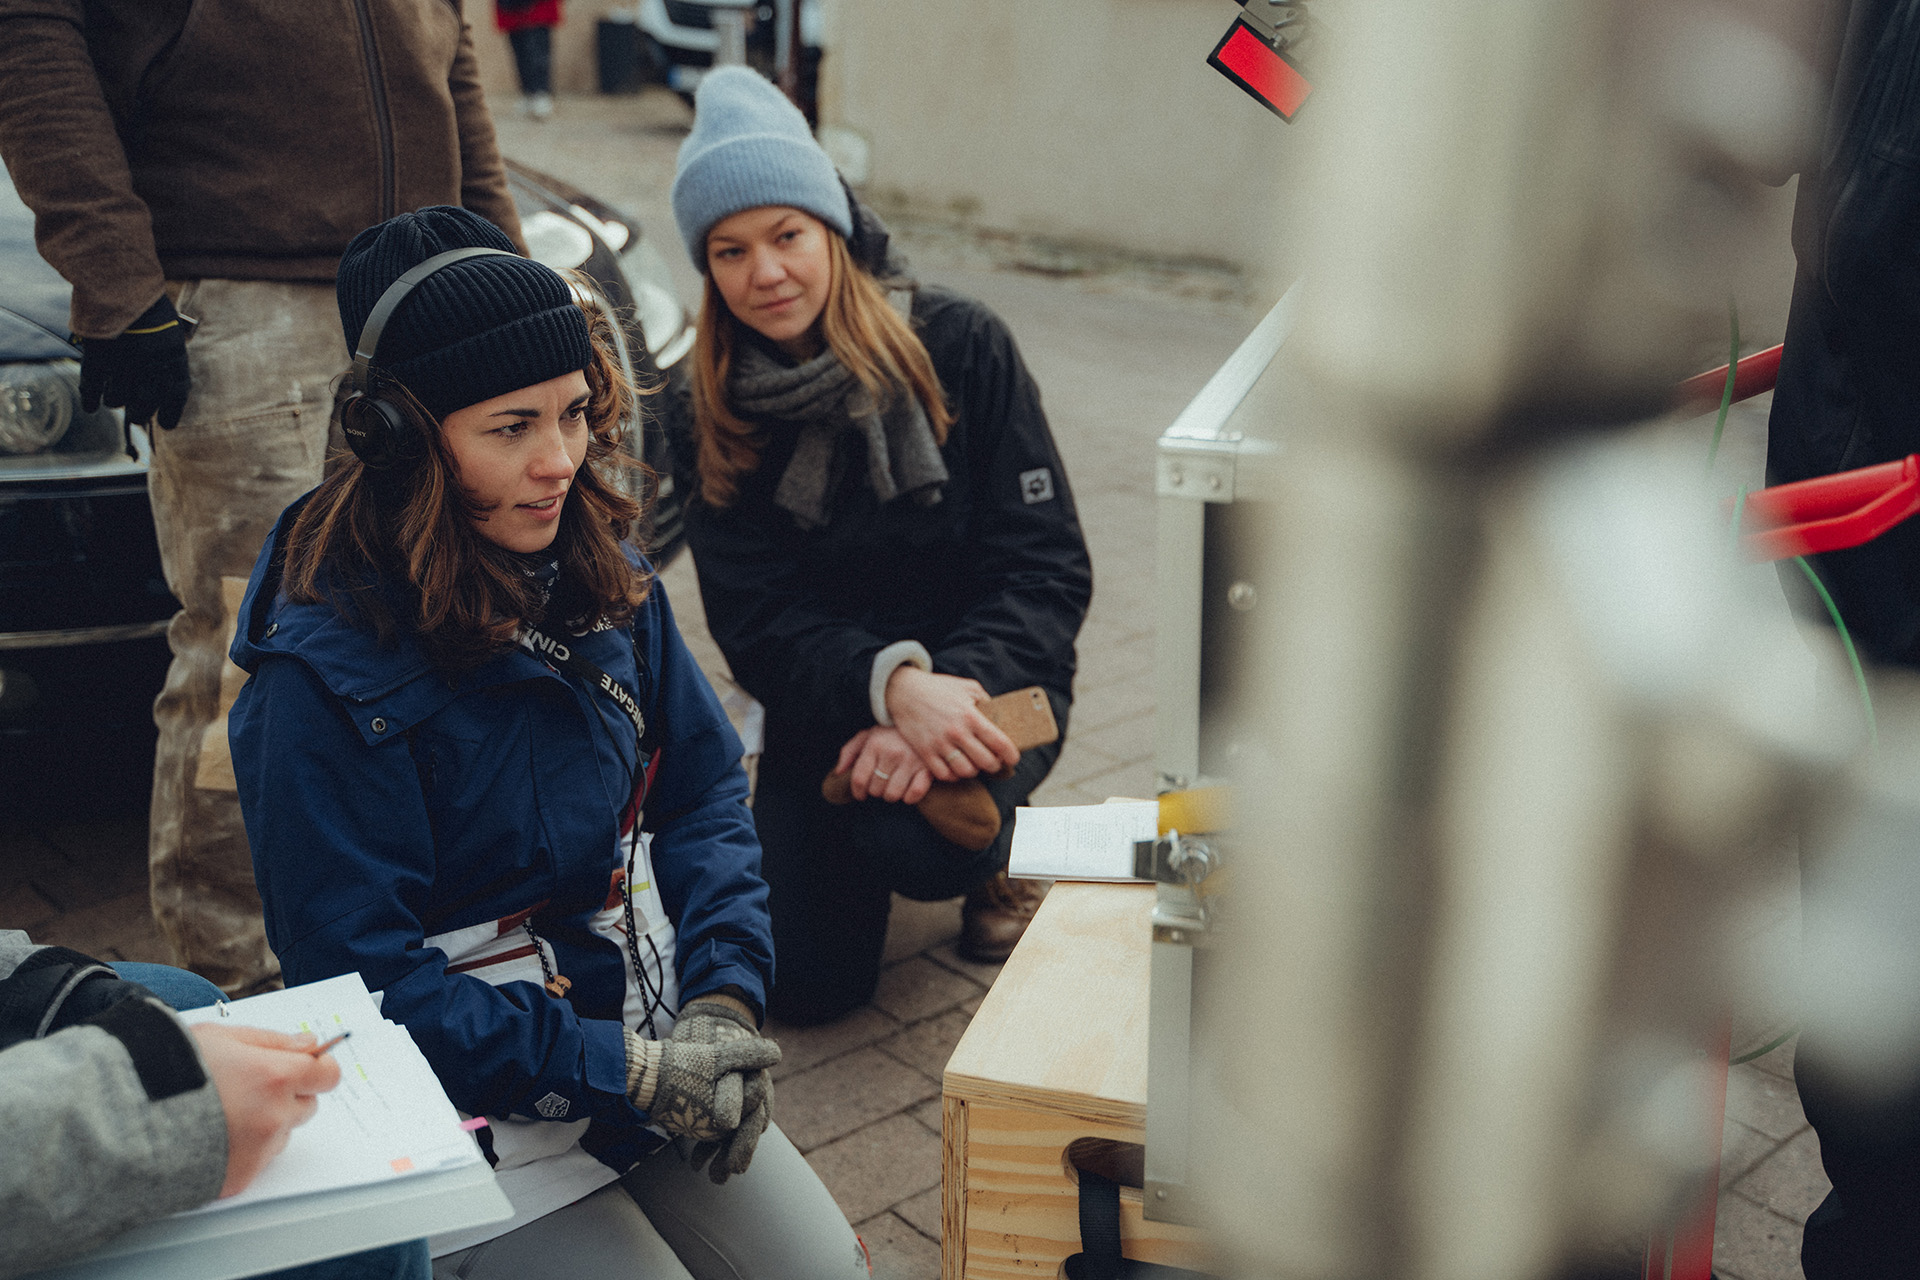 Two female filmmakers looking at a monitor on a film set